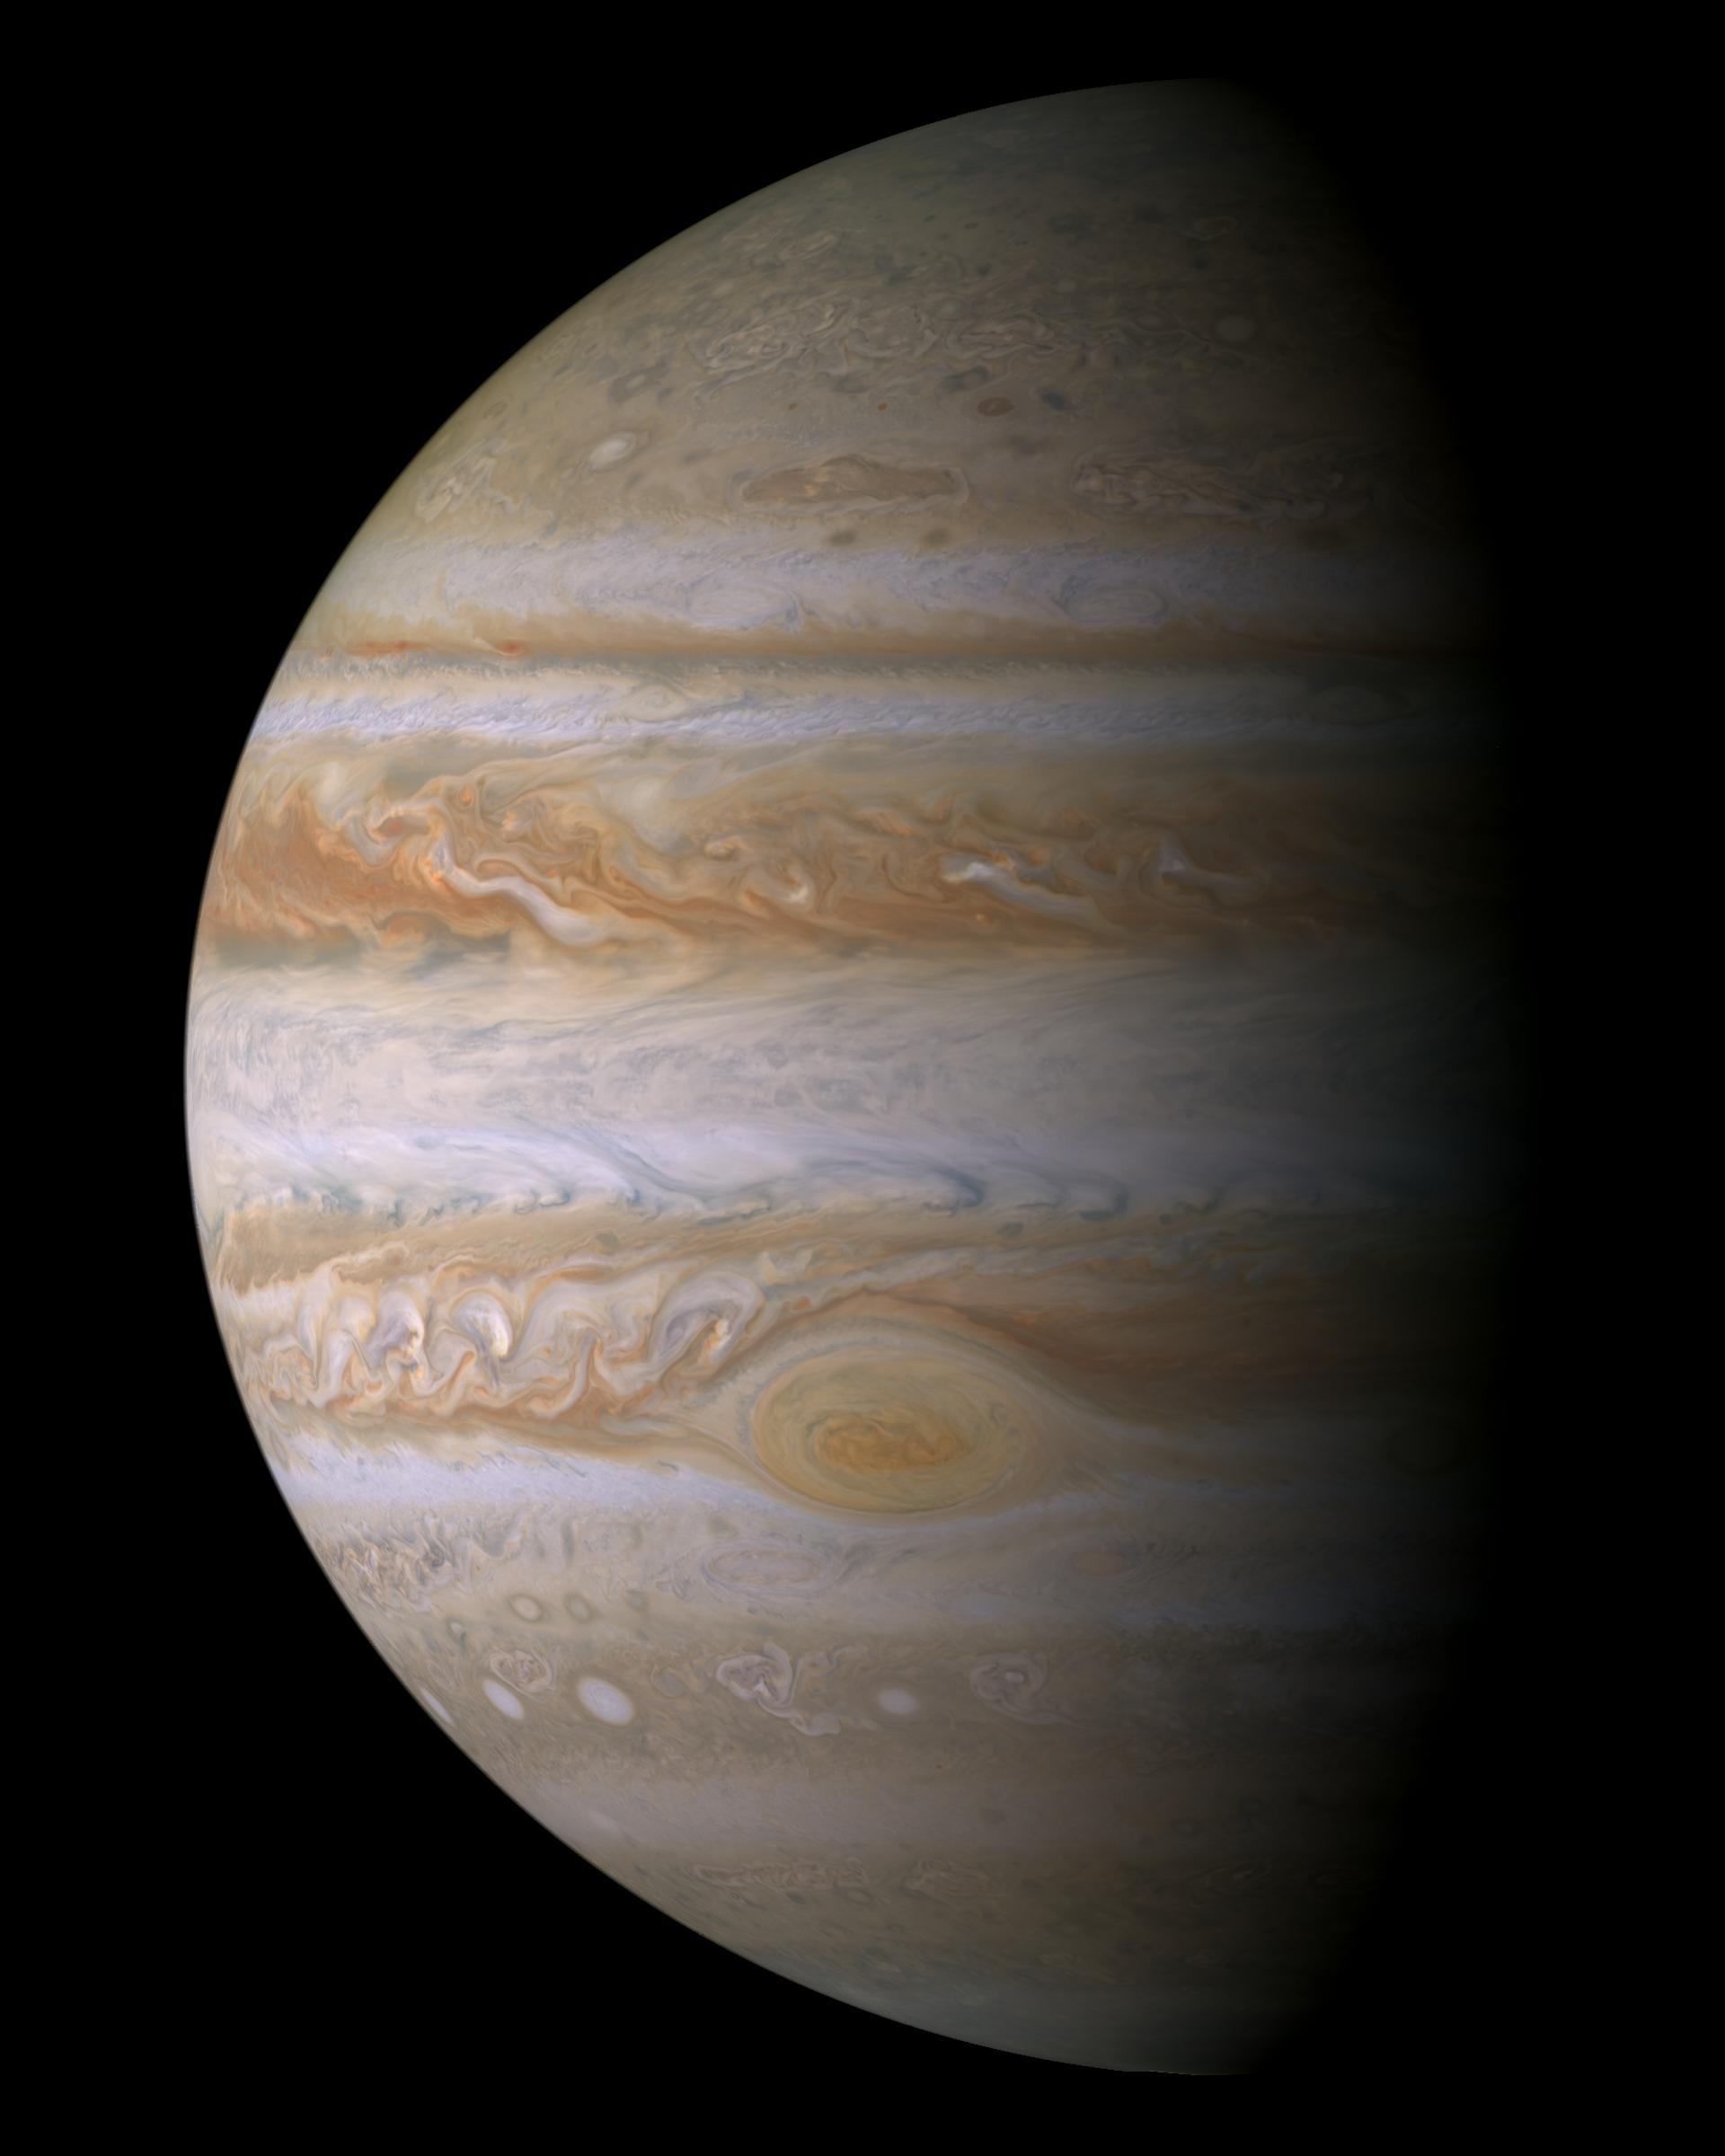 This true color mosaic of Jupiter was constructed from images taken by the narrow angle camera onboard NASA's Cassini spacecraft on December 29, 2000, during its closest approach to the giant planet at a distance of approximately 10 million kilometers (6.2 million miles).